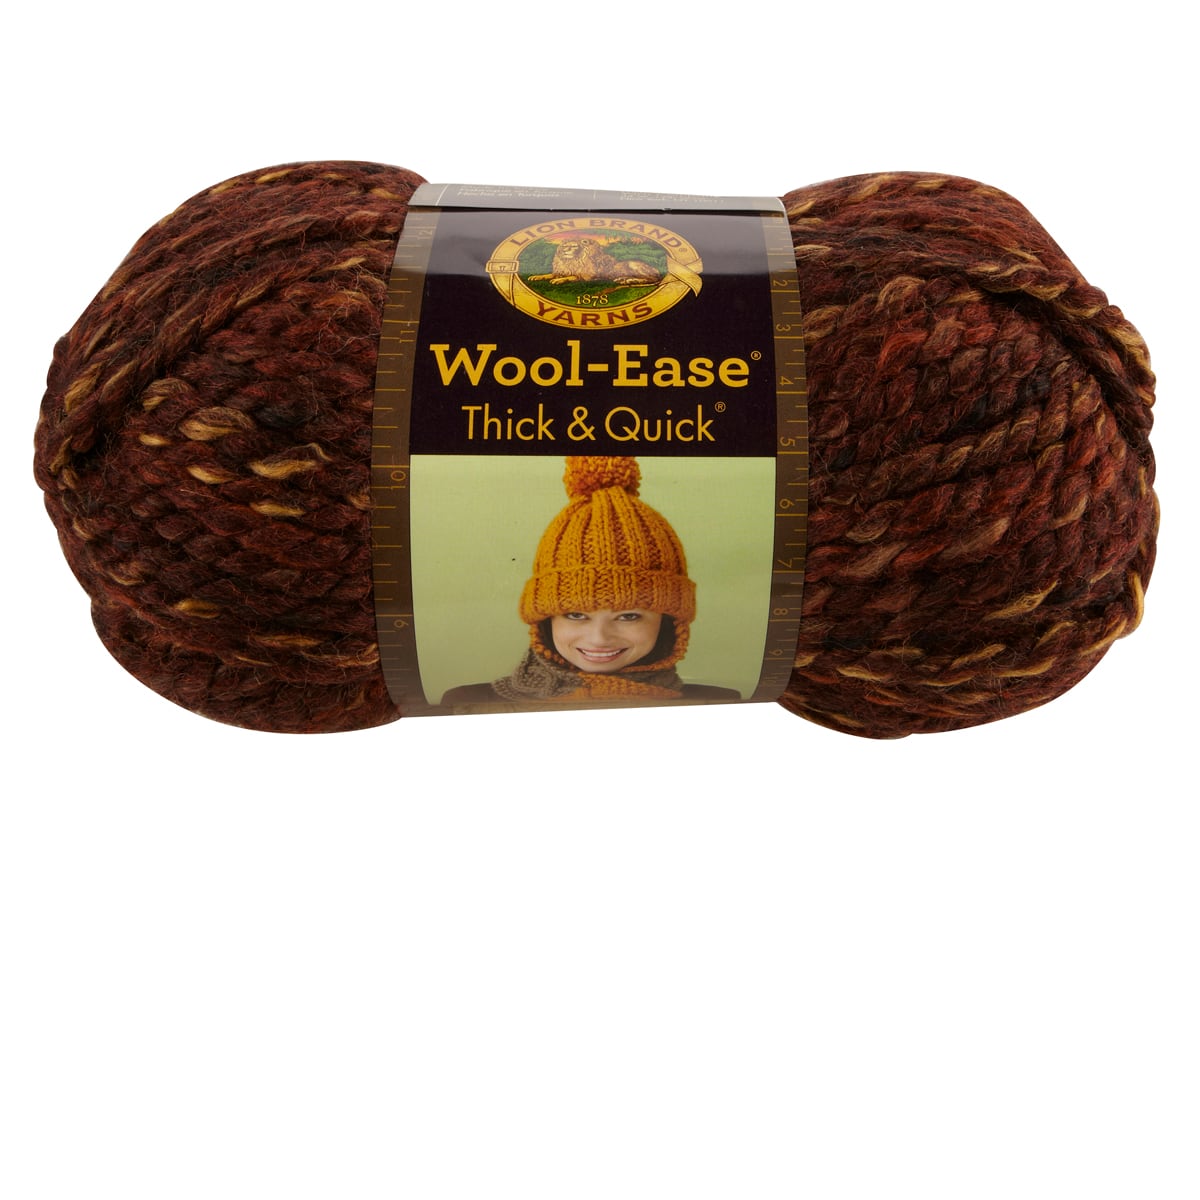 Lion Brand Wool-Ease Thick & Quick City Lights Yarn